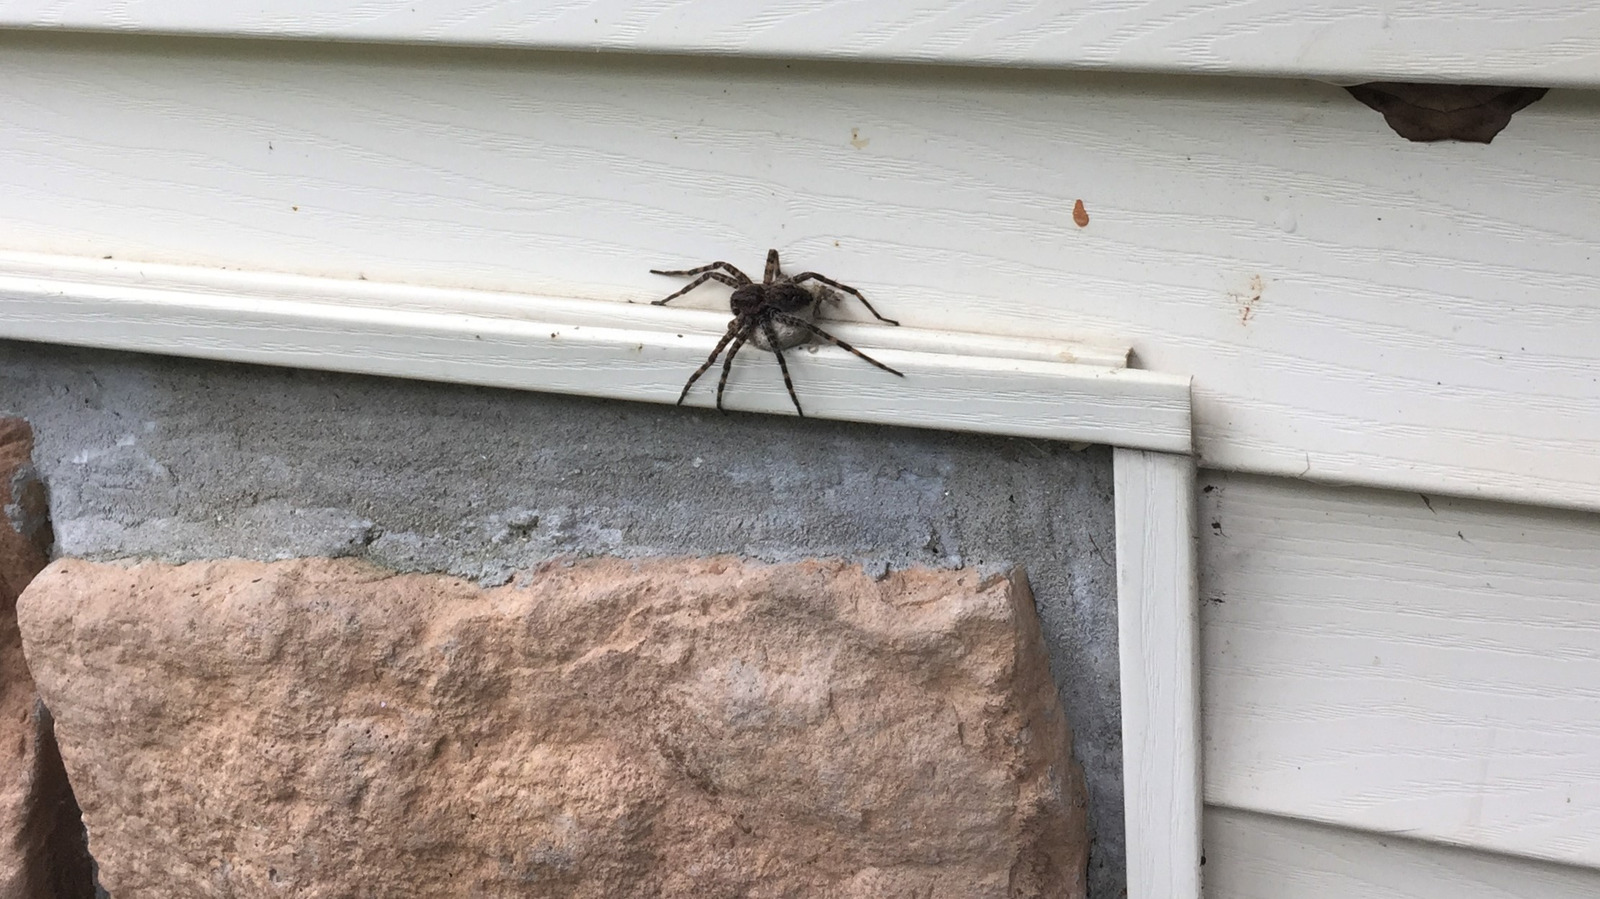 Country diary: I've put this house spider outside before – several times, Spiders